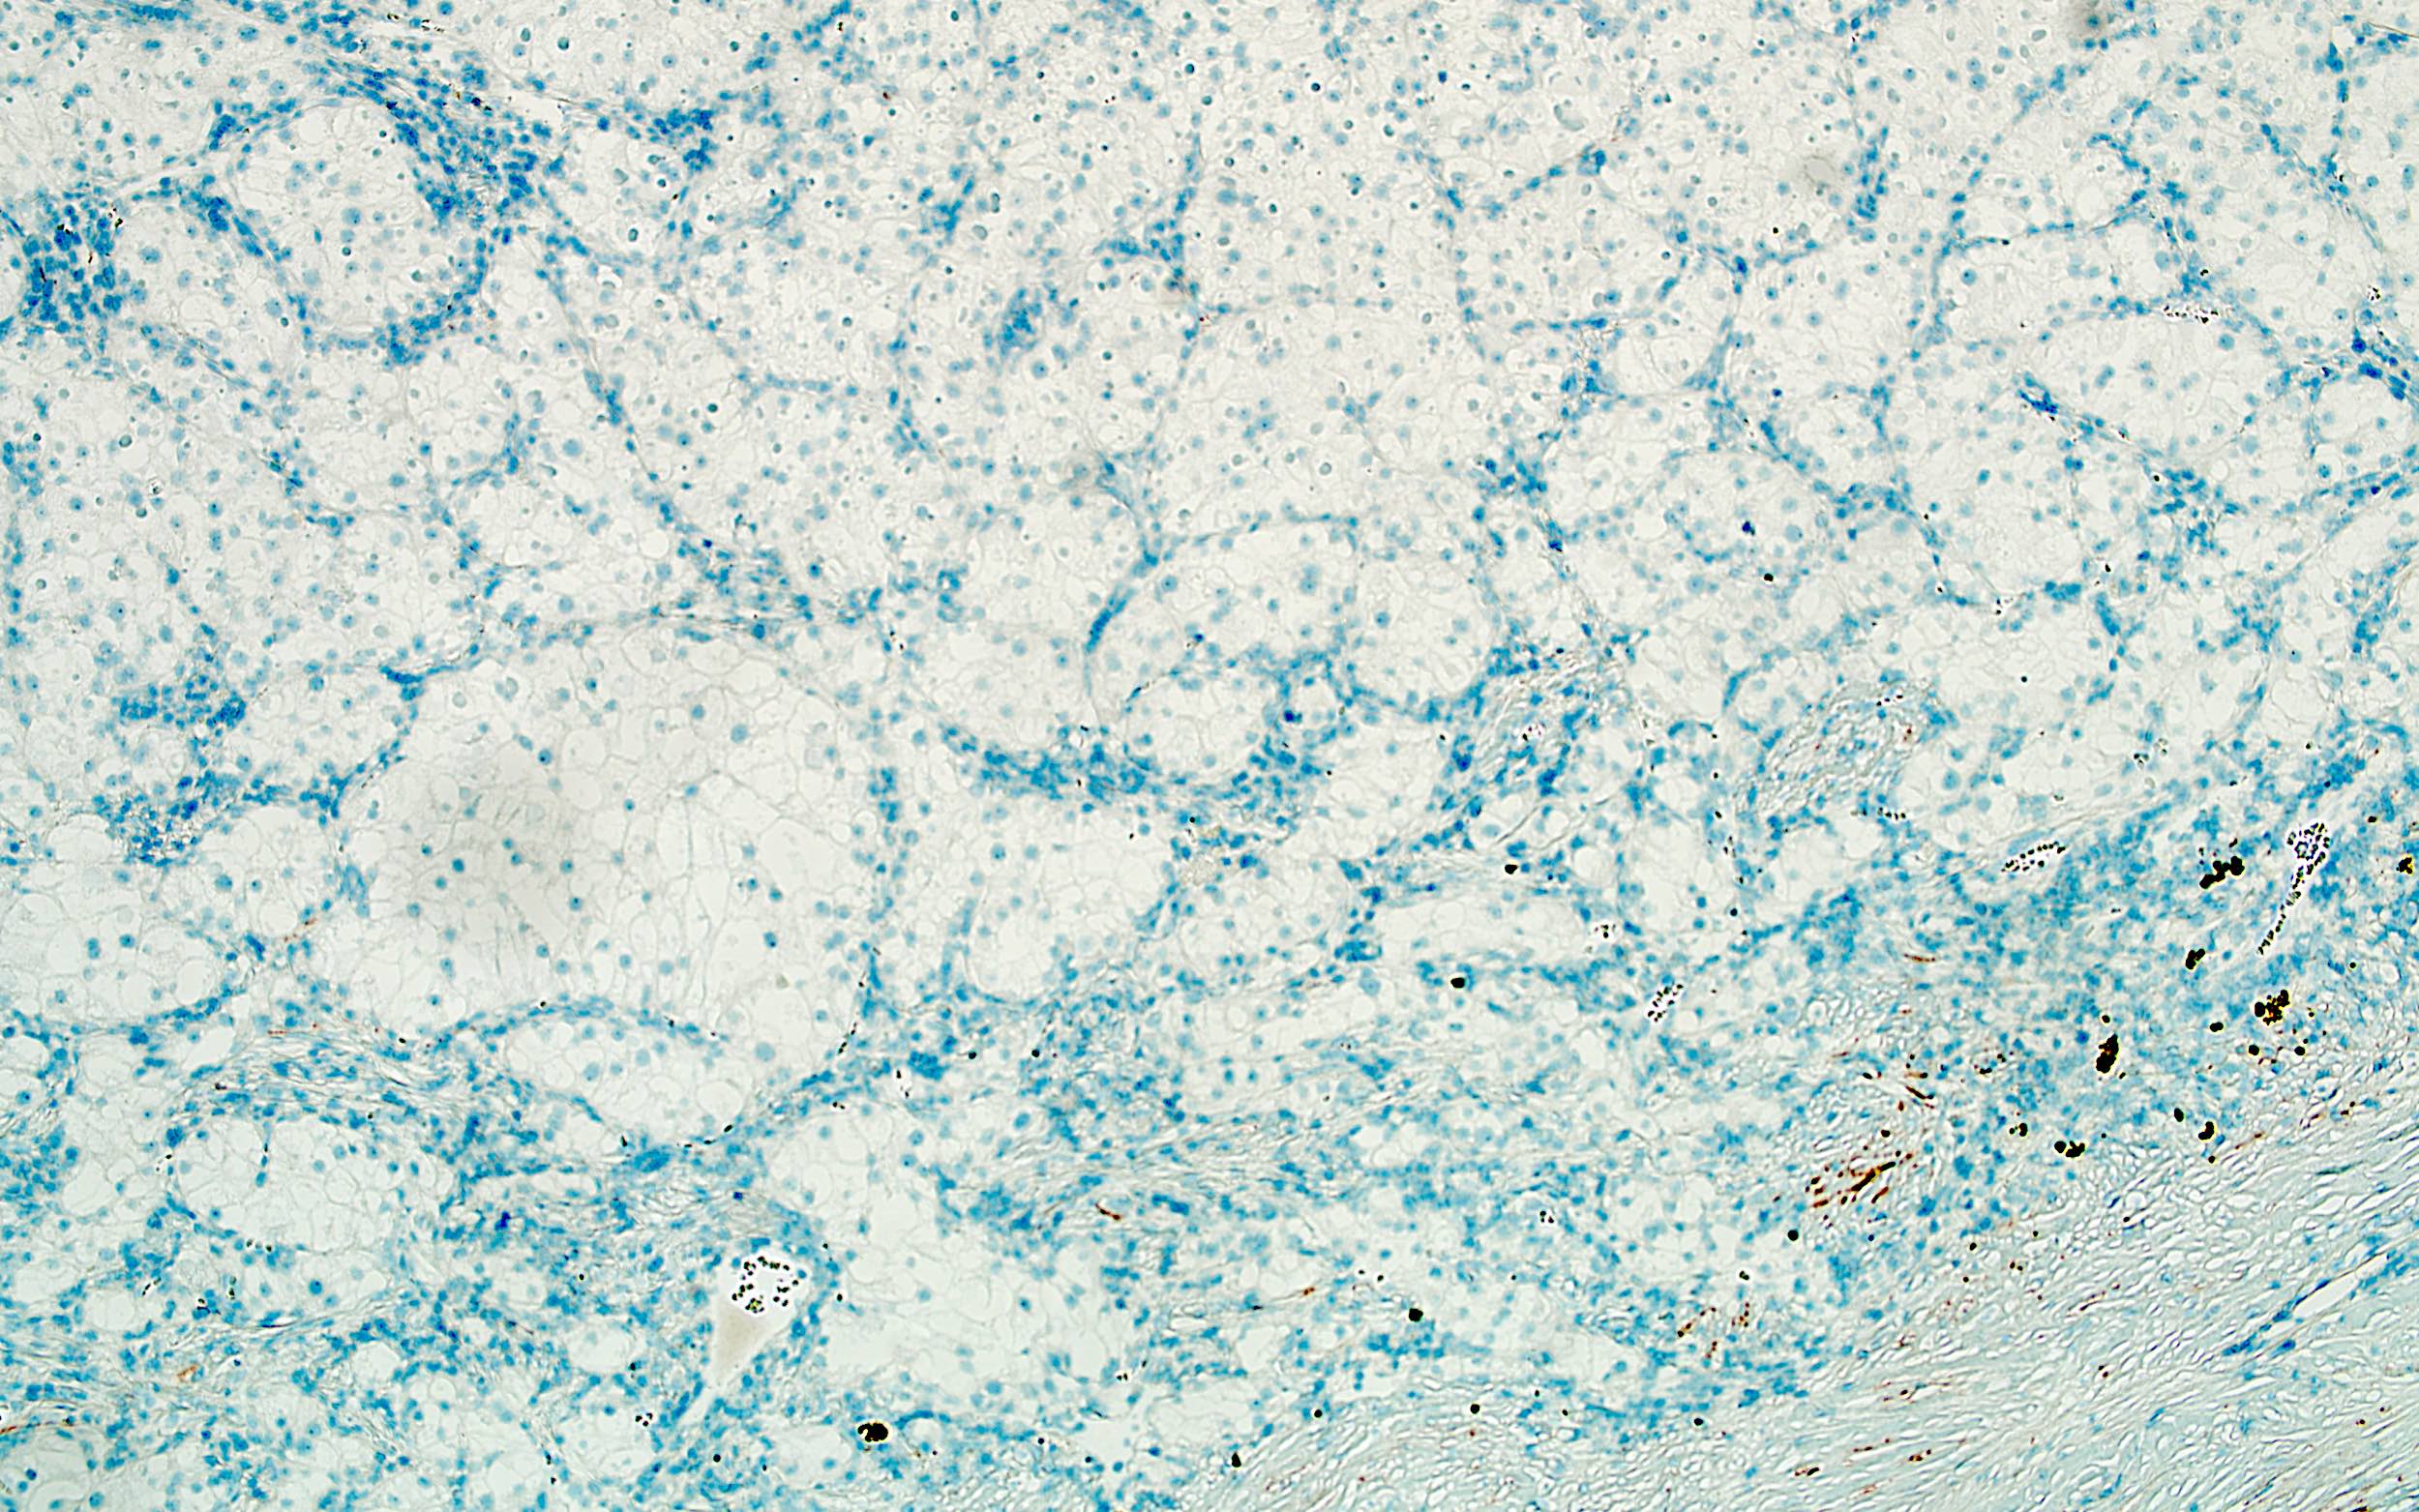 Atypical cells of CCRCC, CK7-